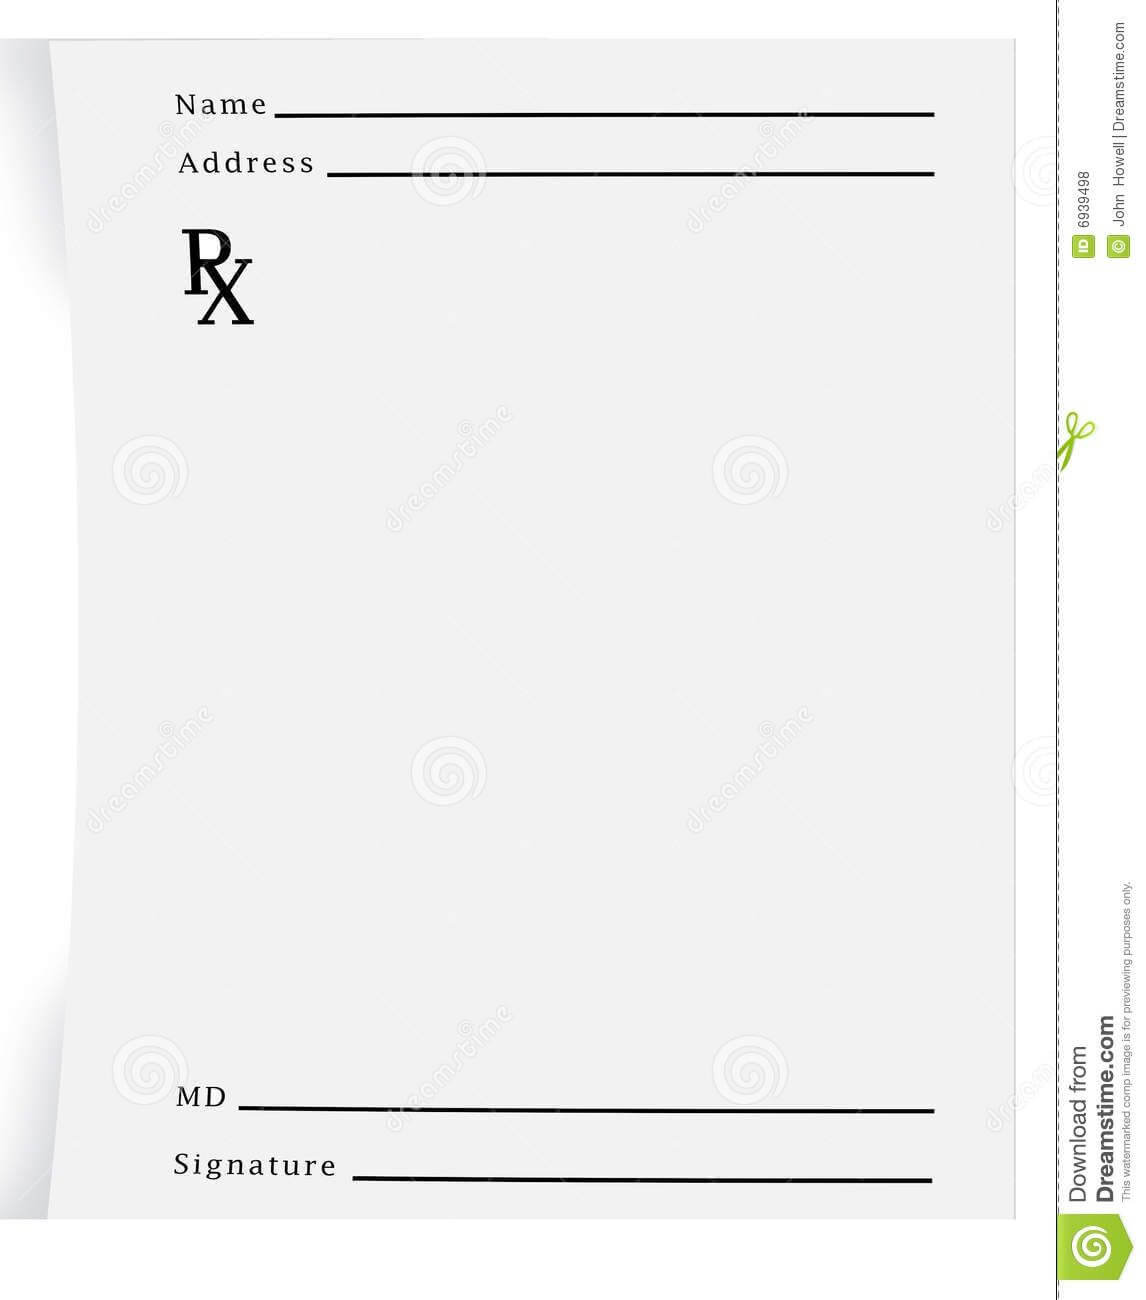 019 Template Ideas Prescription Pad Blank Download From Over Pertaining To Blank Prescription Form Template